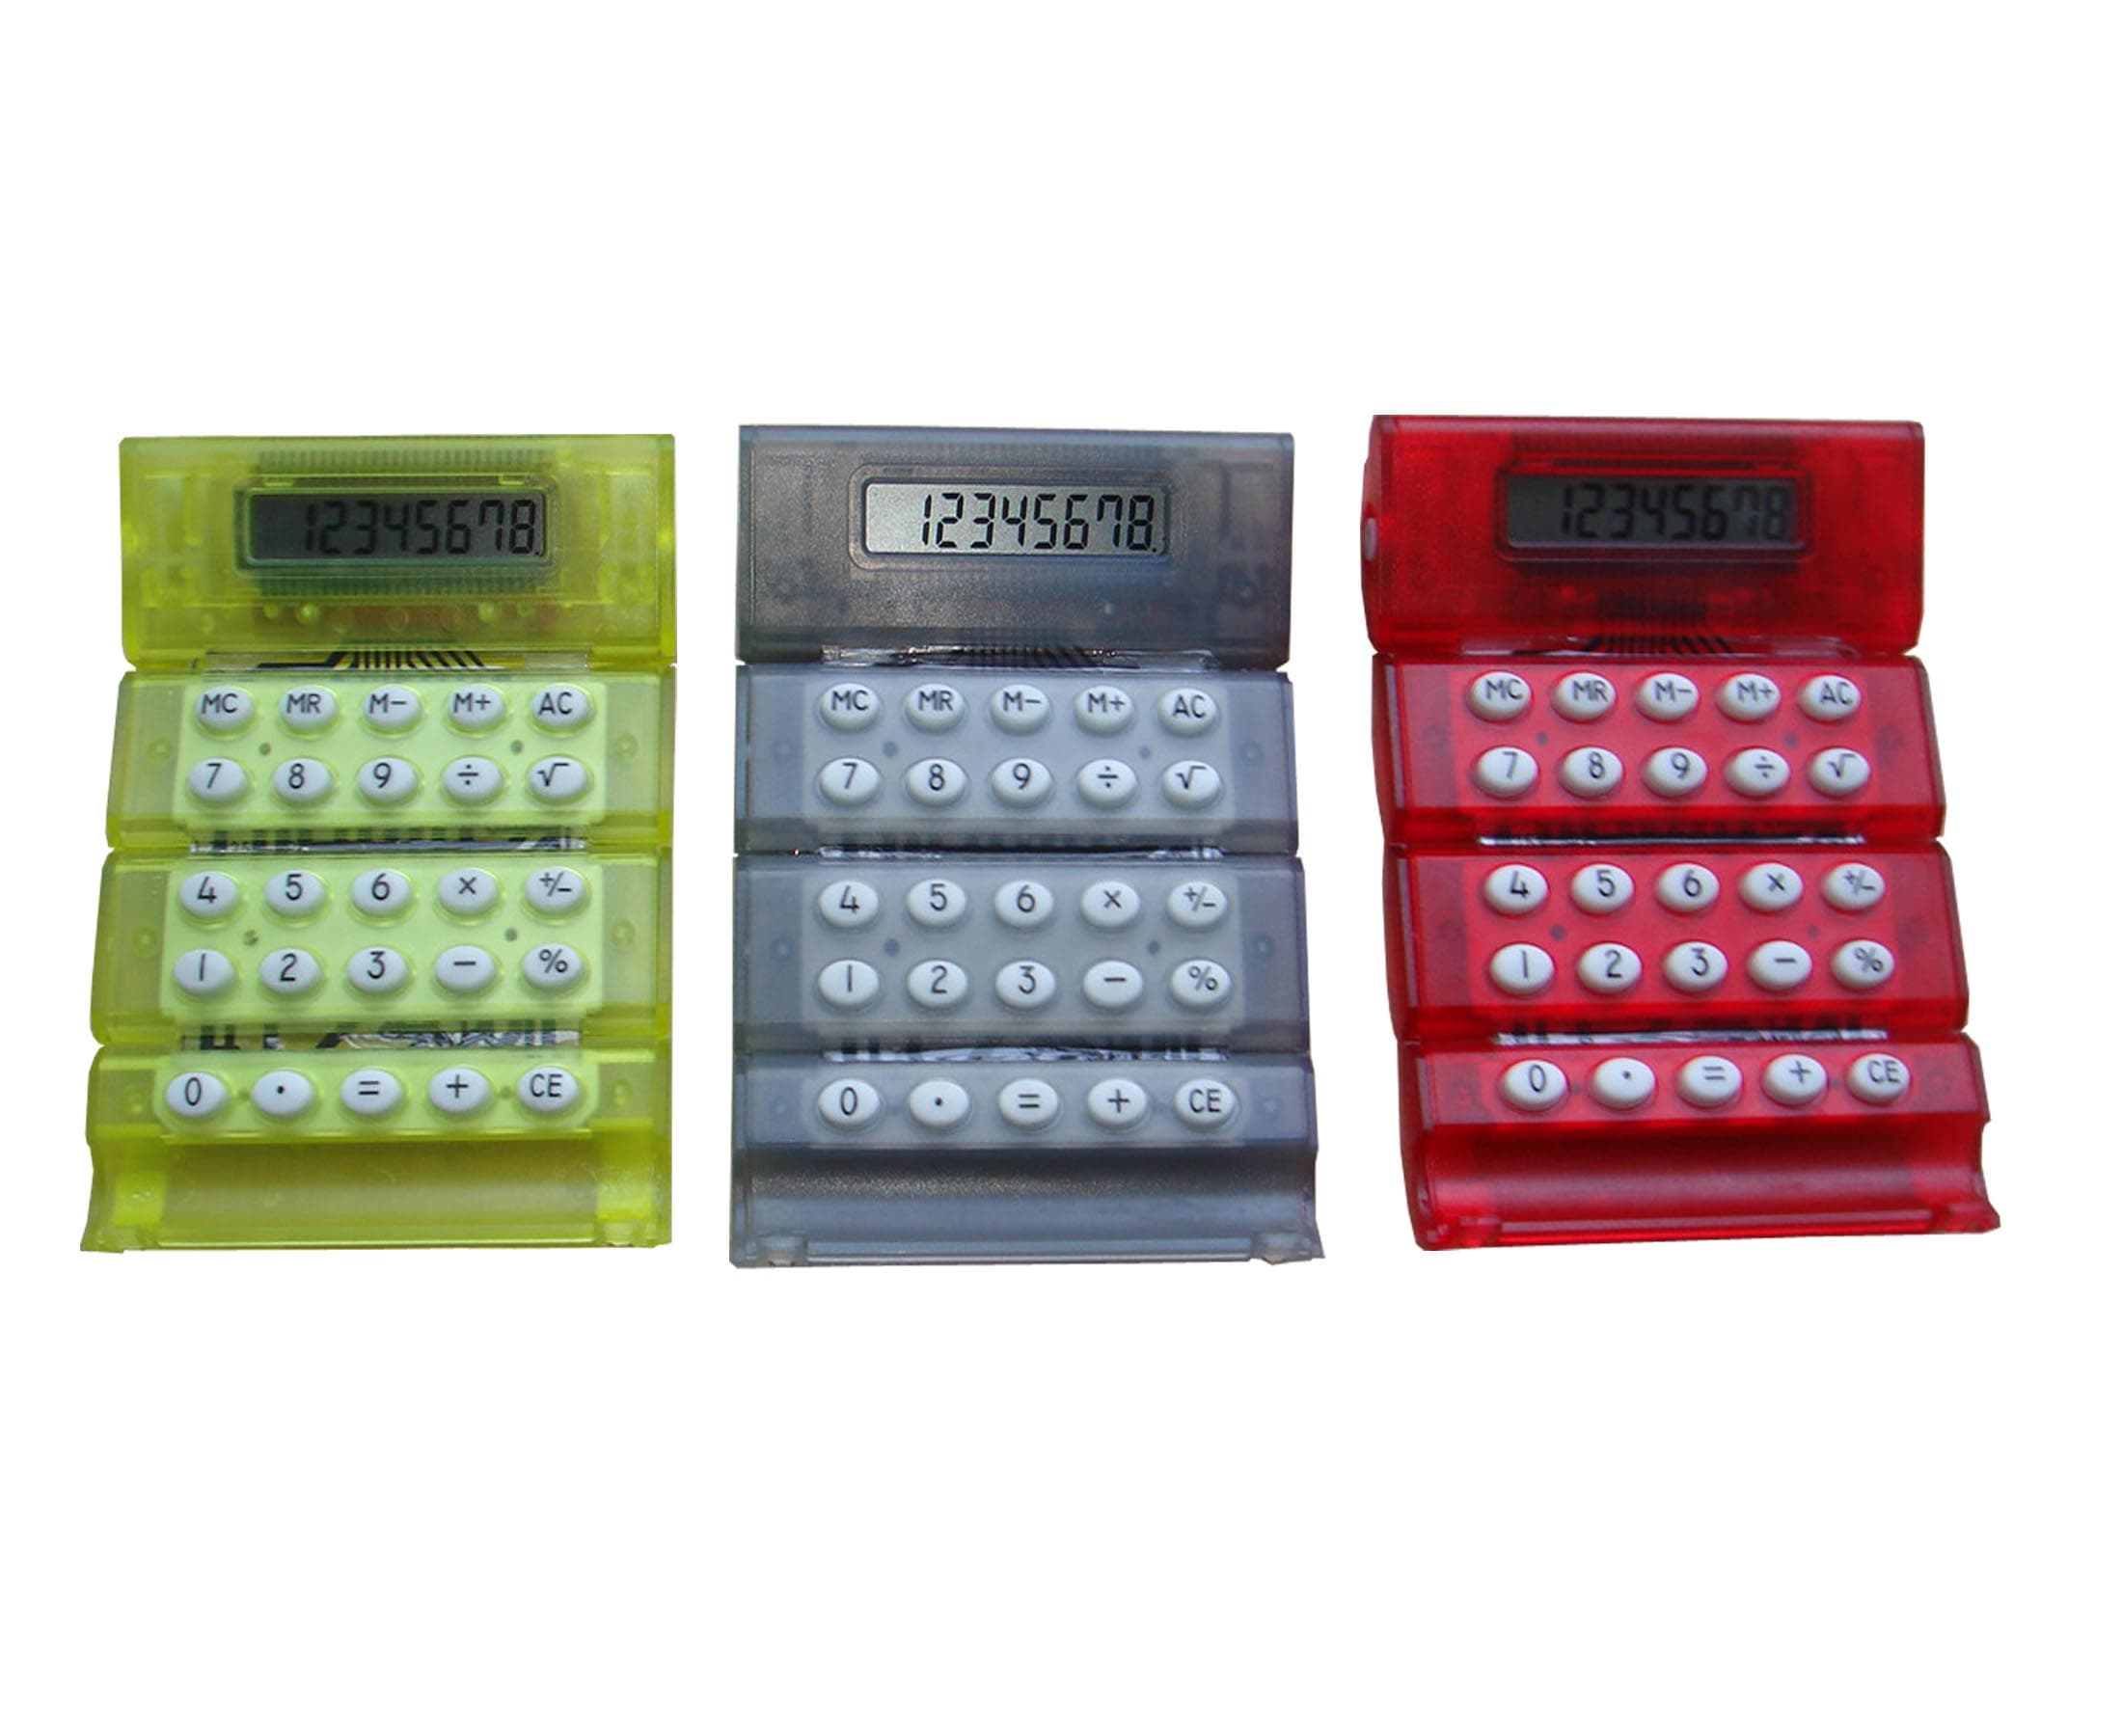 Calculator  Selling Leads, Manufacturers, Suppliers, Exporters